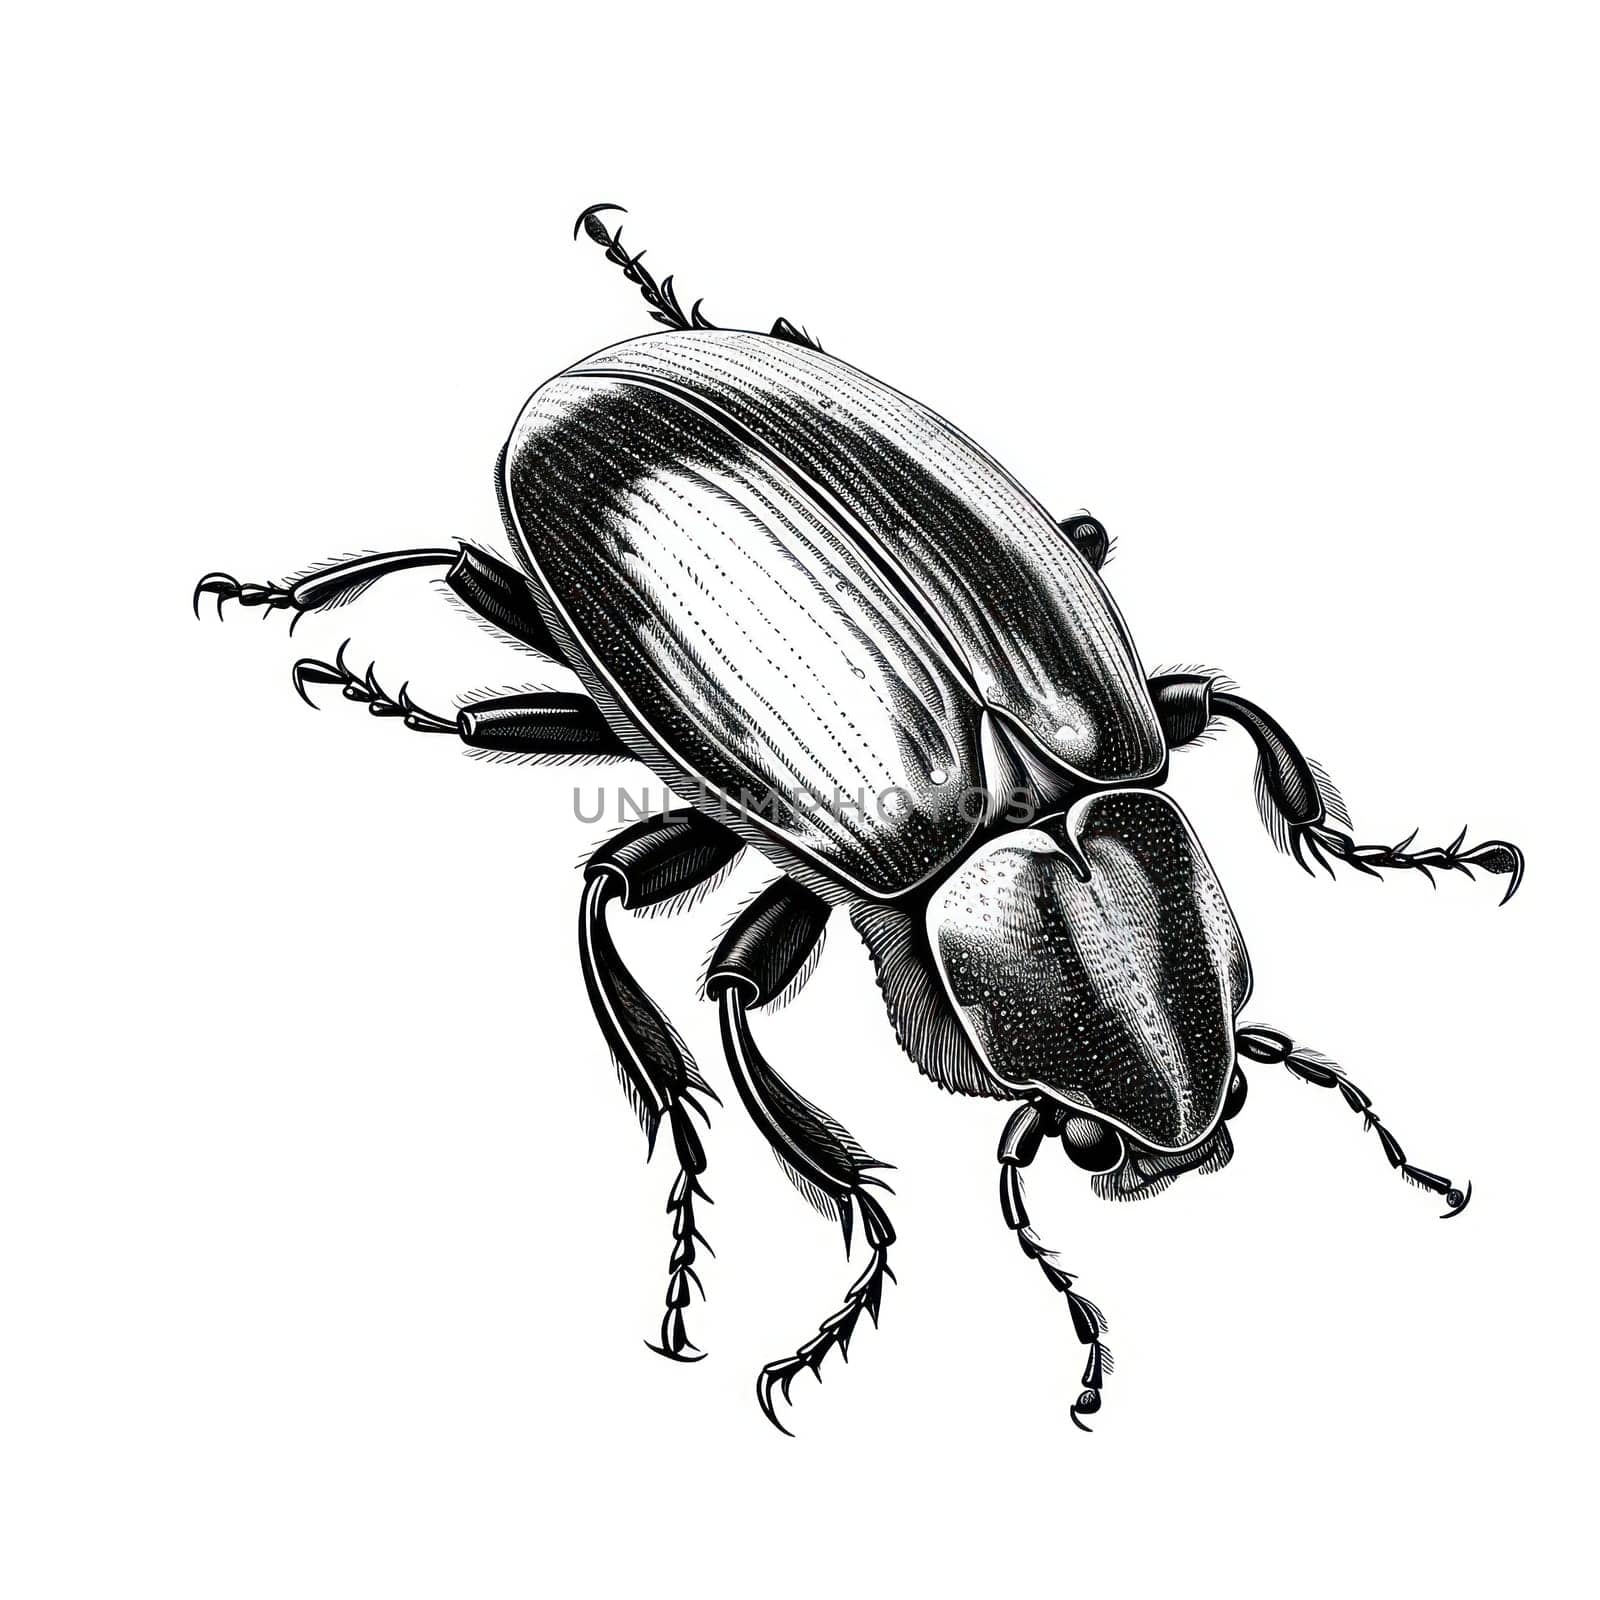 Vintage Insect Sketch: Black & White Engraved Illustration of a BeetlÐµ, an Antique Bug from the 19th Century, Symbolizing Zoology and entomology, on a White Background by Vichizh